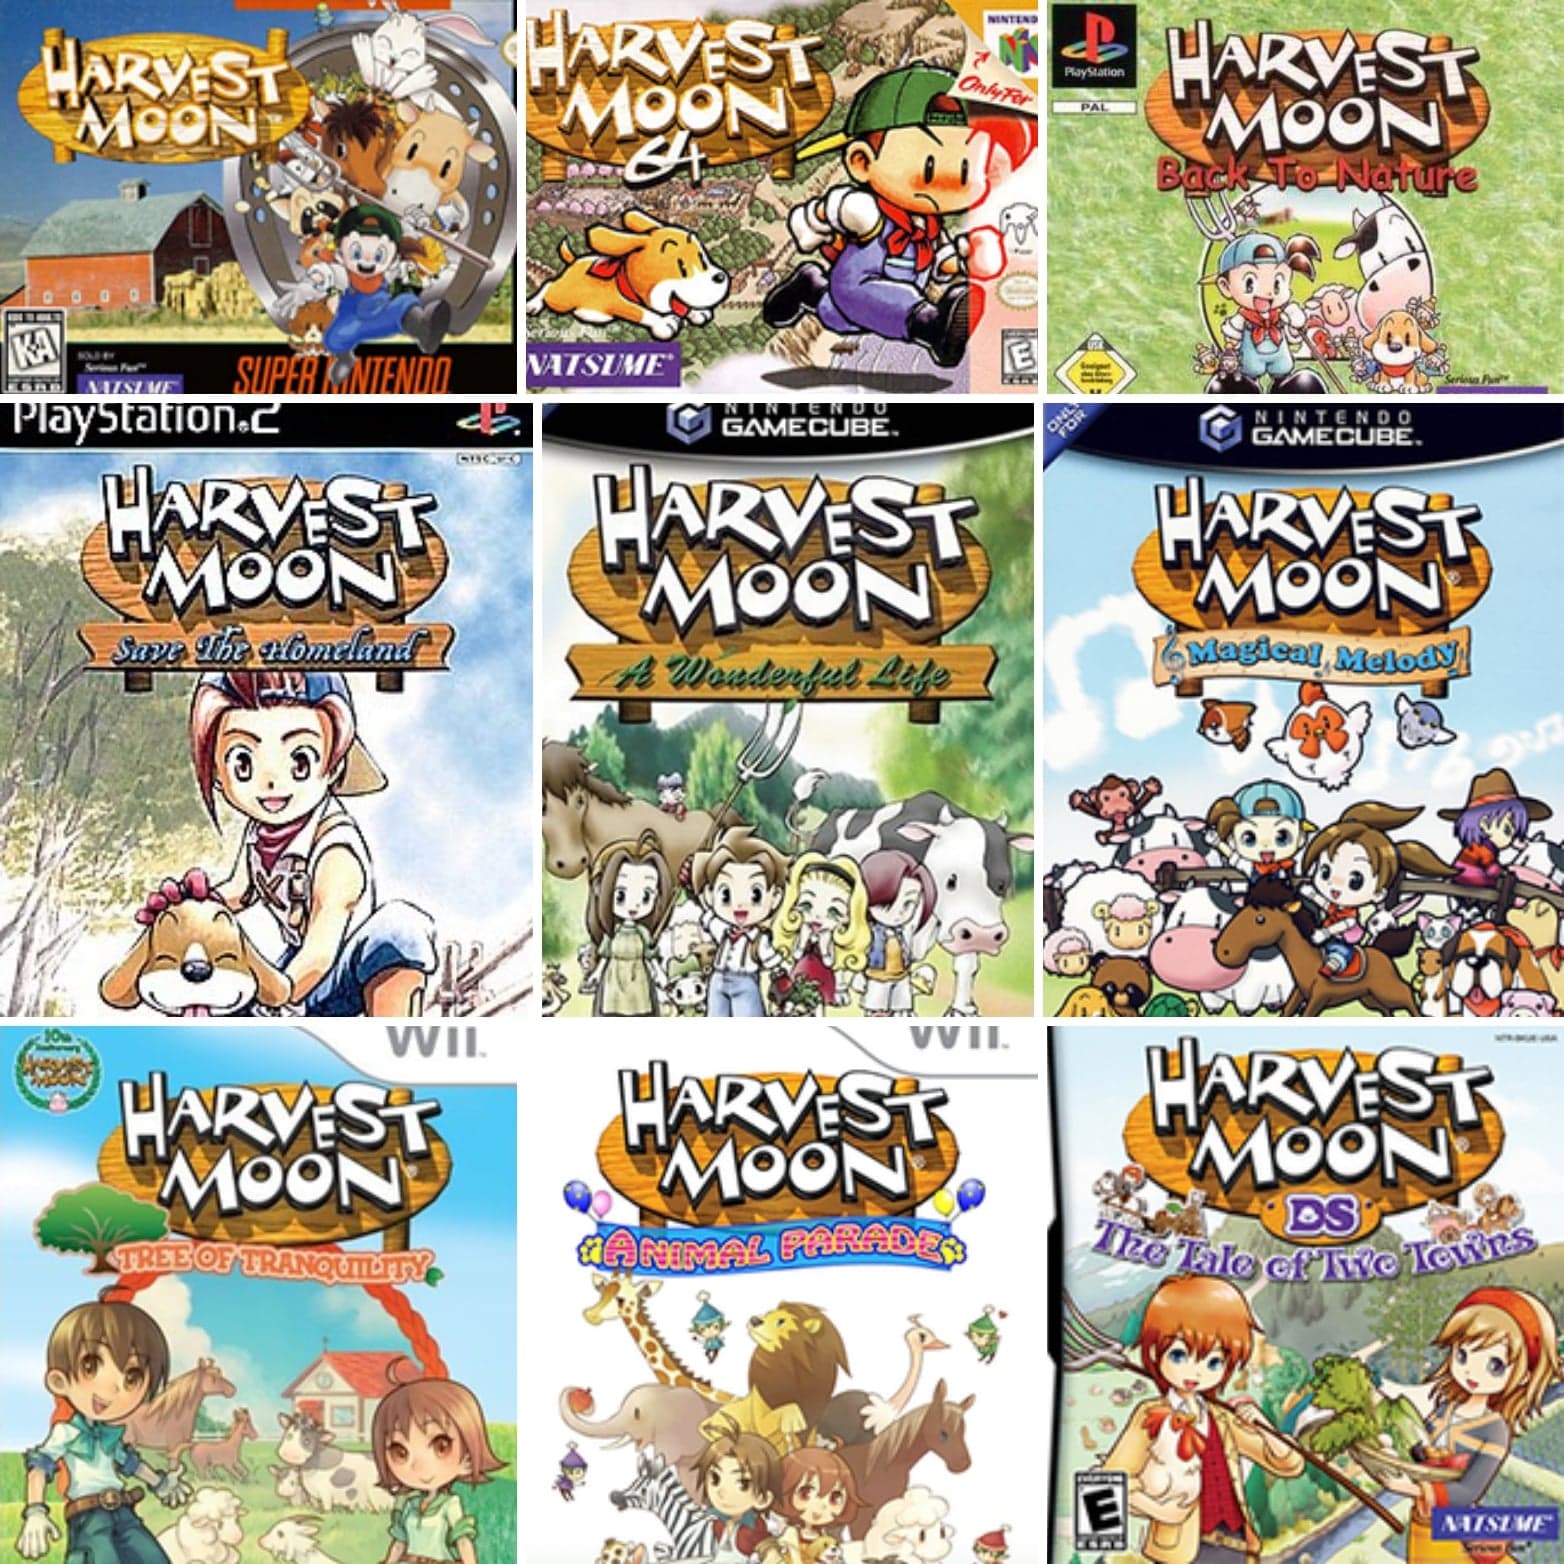 best harvest moon game on 3ds